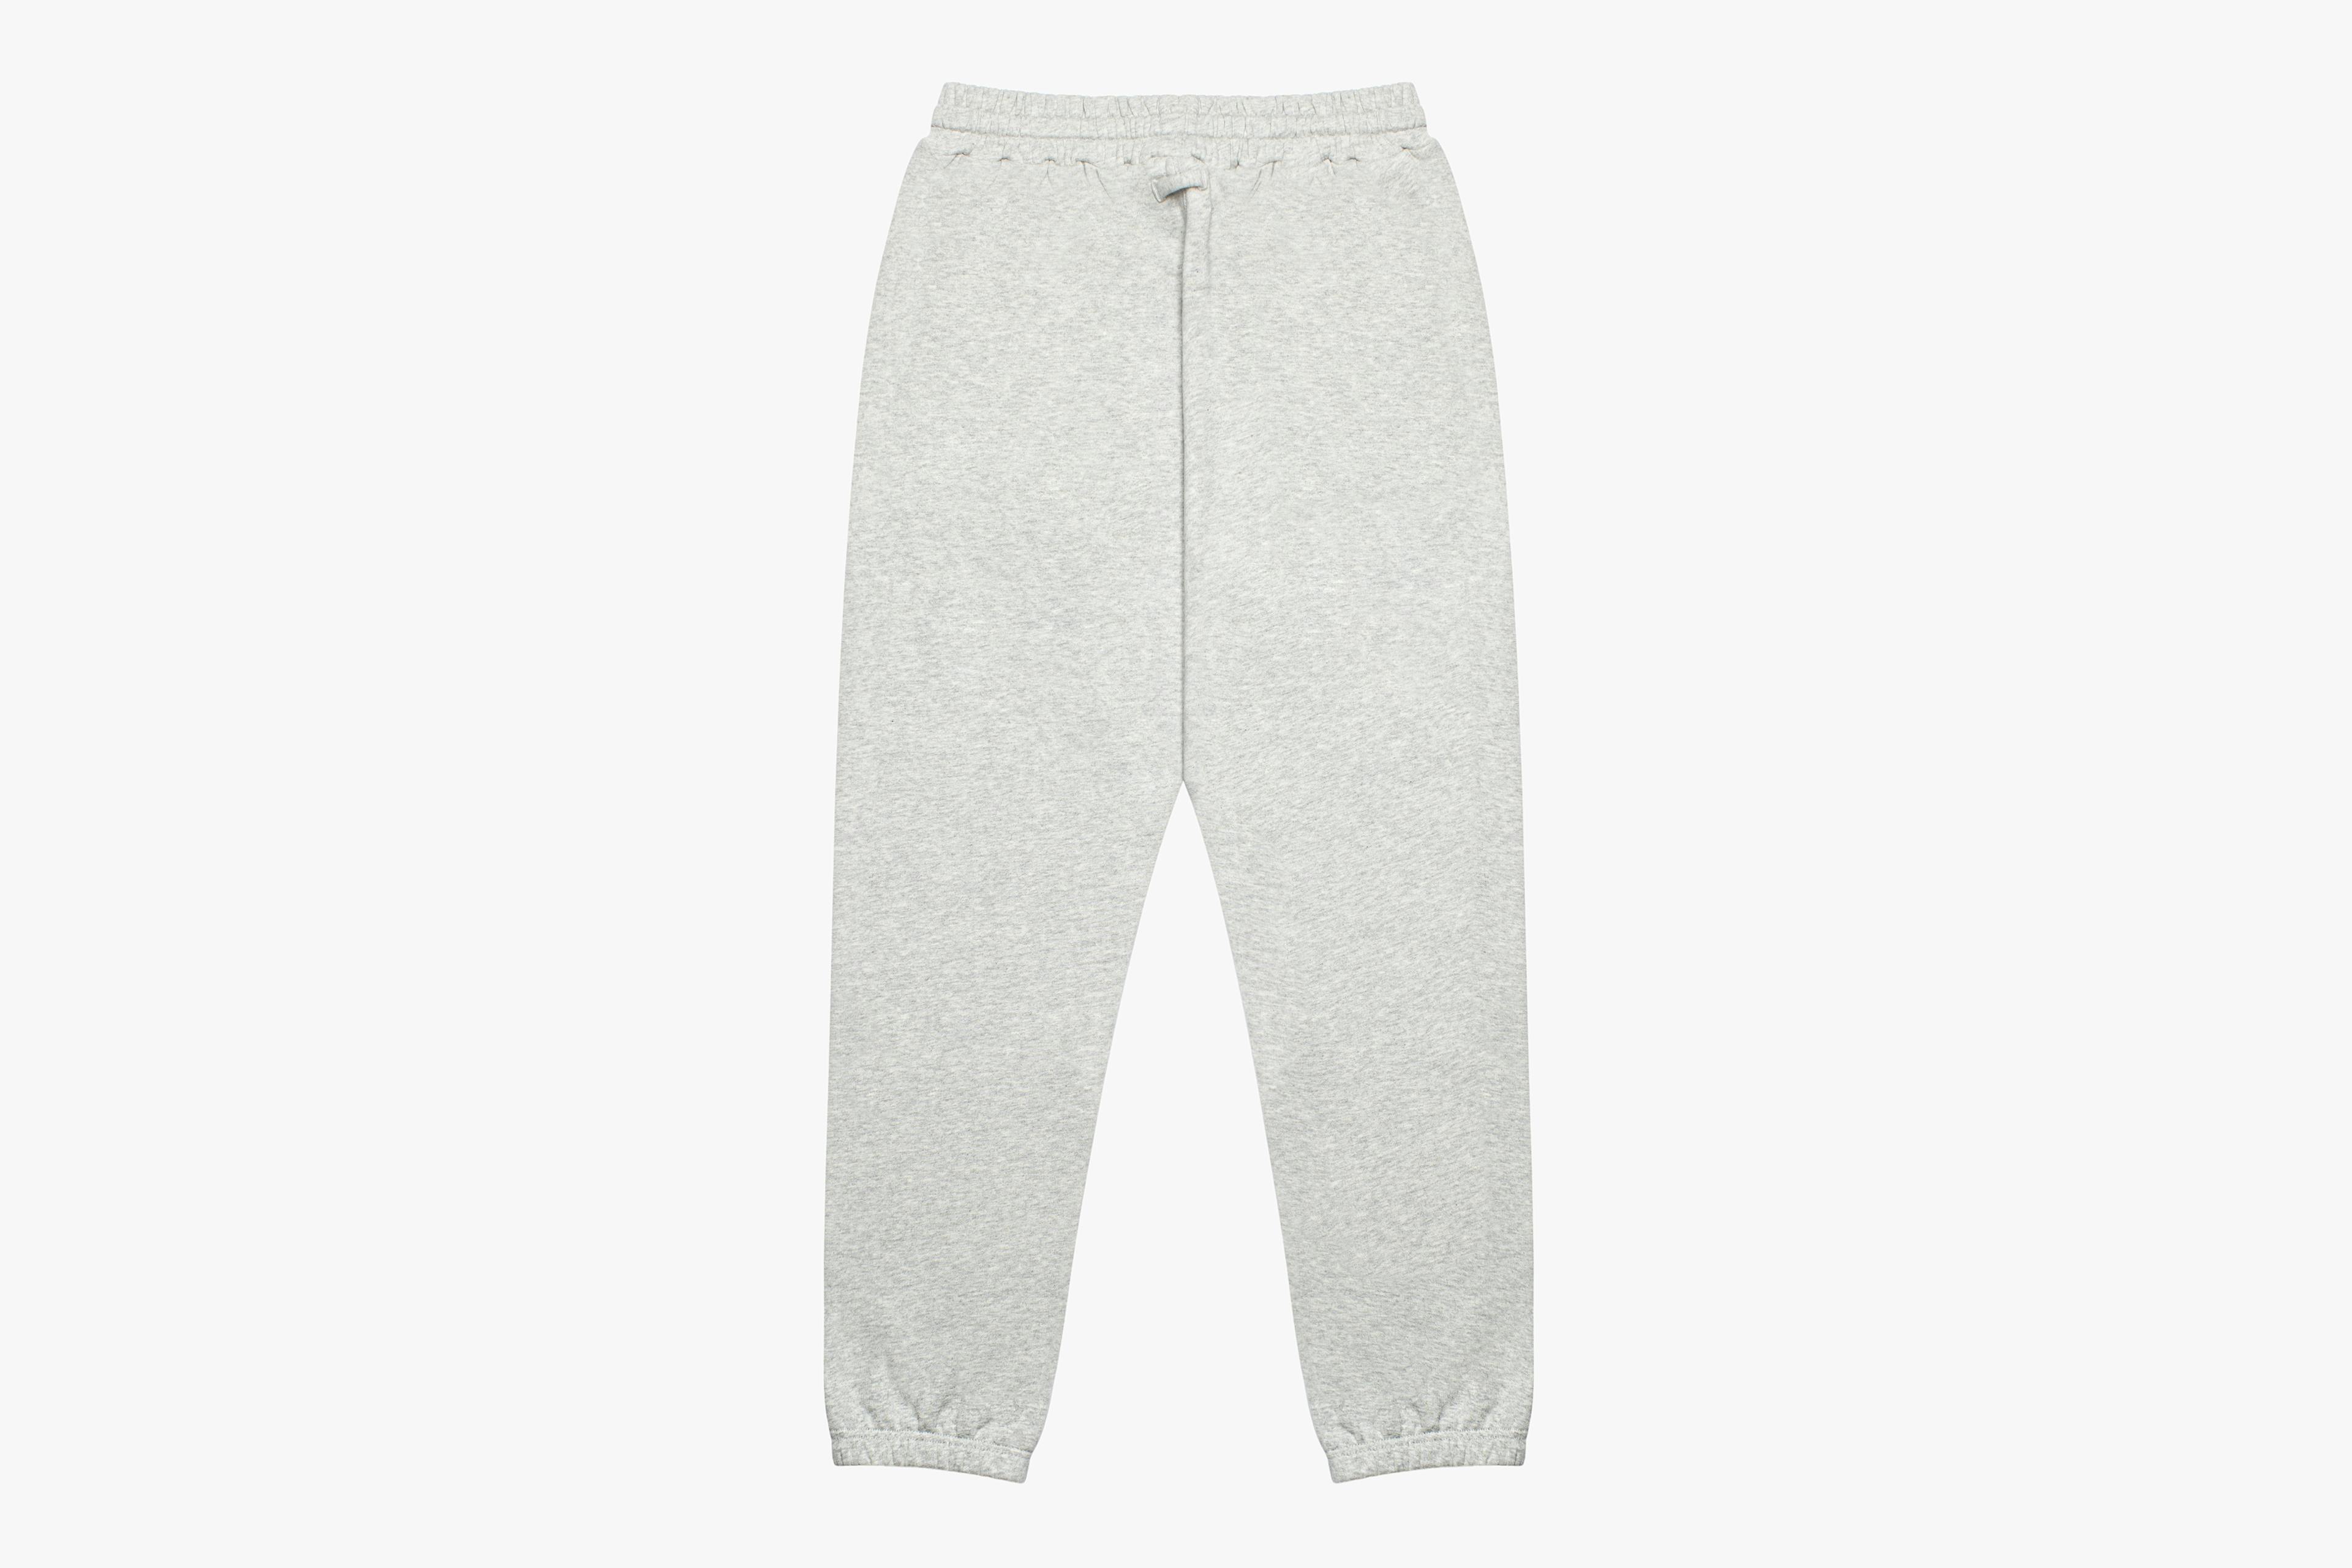 Back View of Thuma Lounge Leisure Sweatpants in Grey for Women